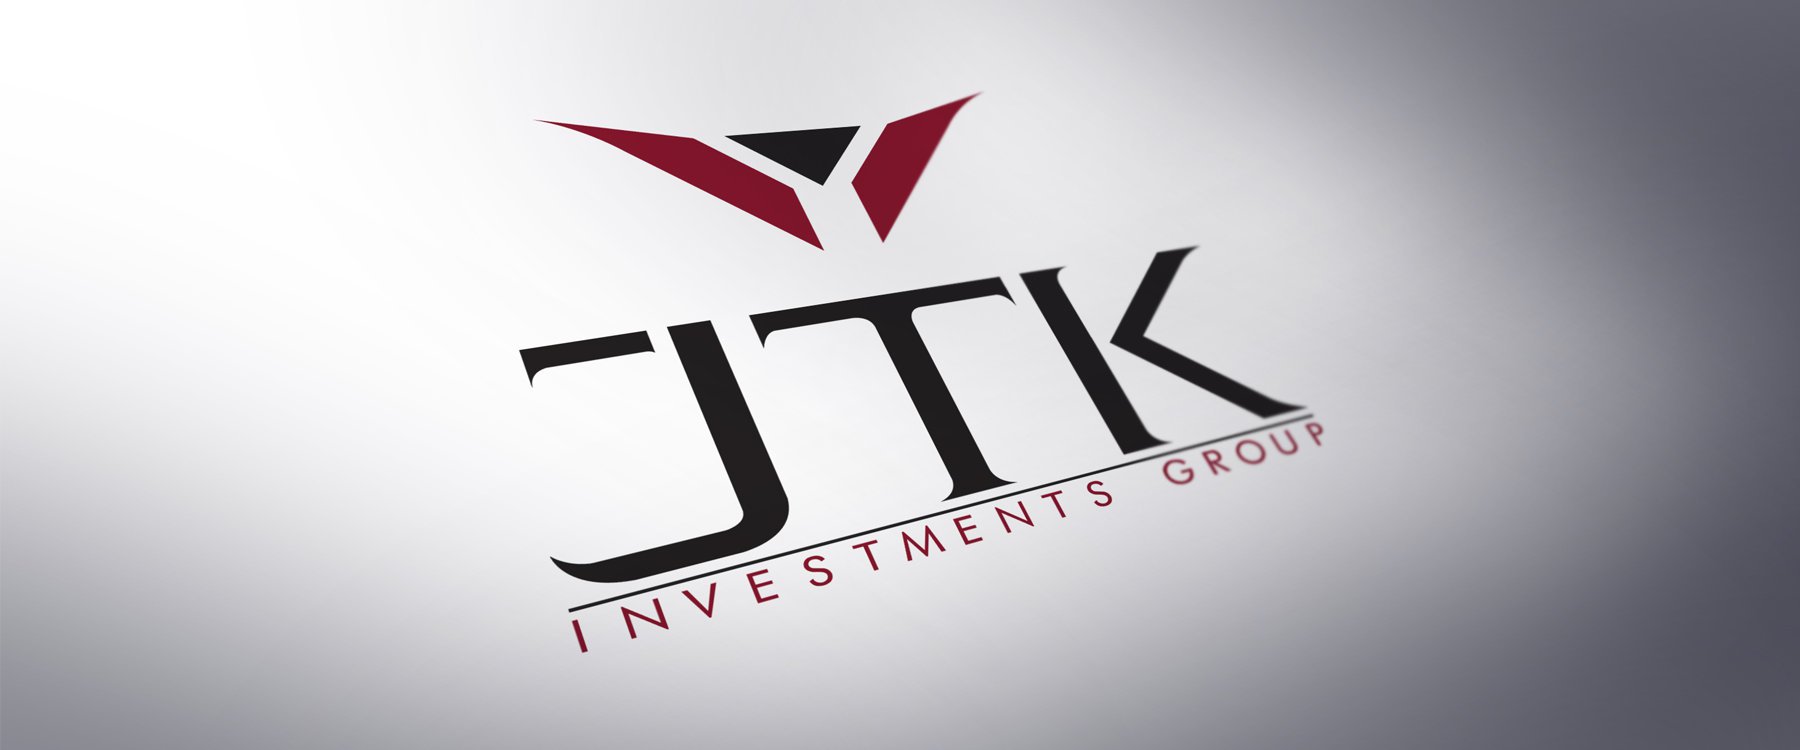 JTK Investments Group #2